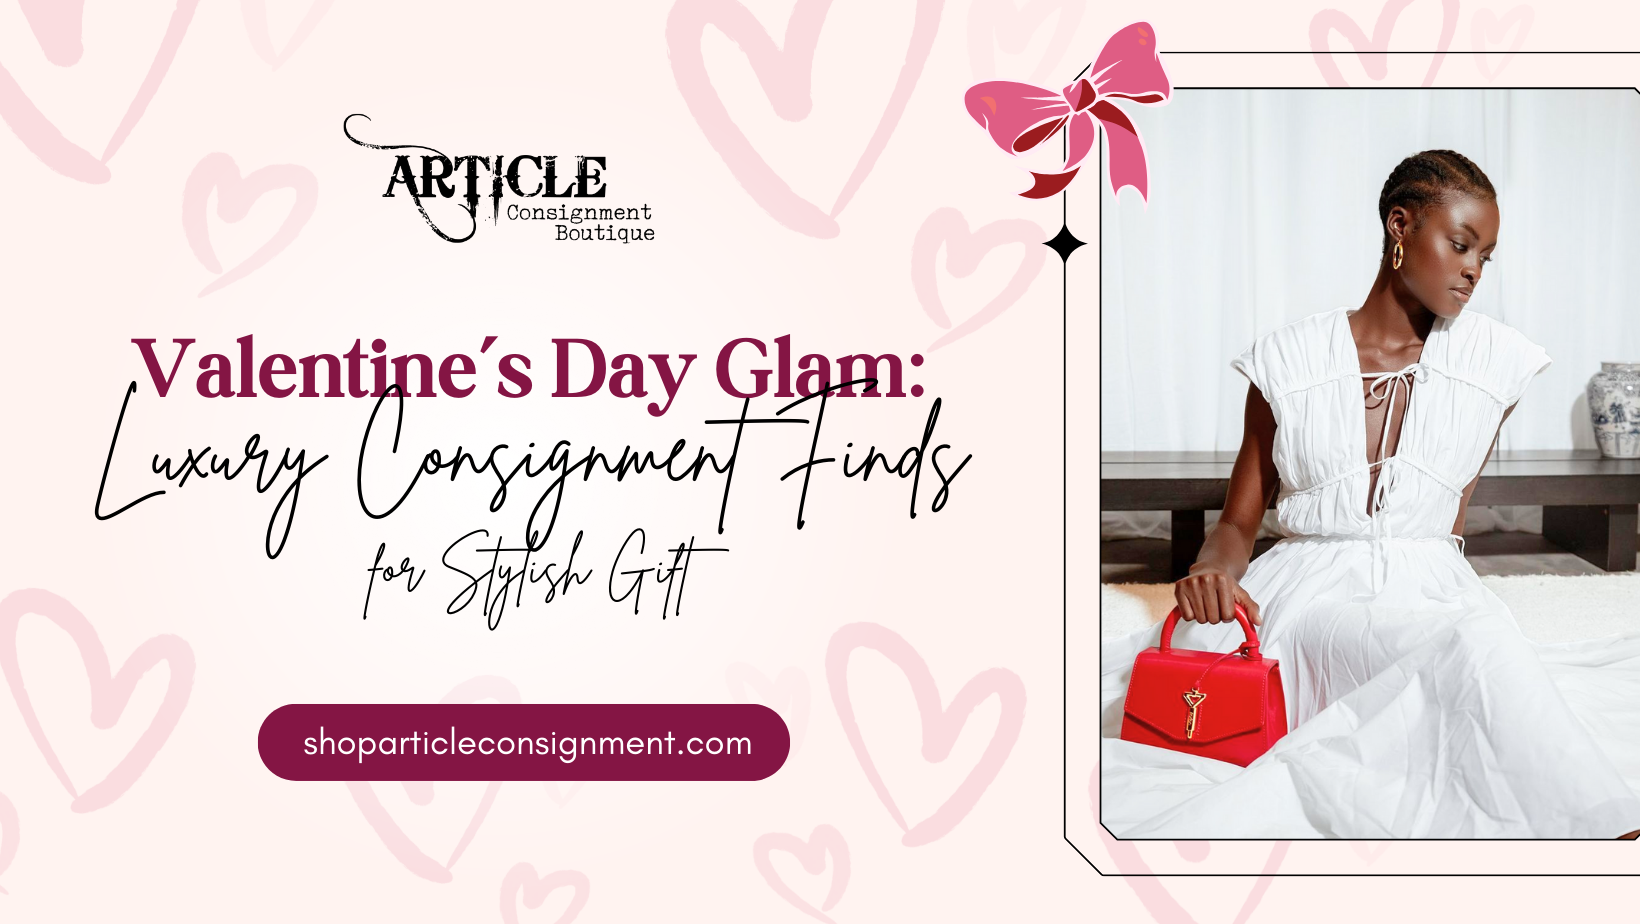 Valentine's Day Glam: Luxury Consignment Finds for a Stylish Gift